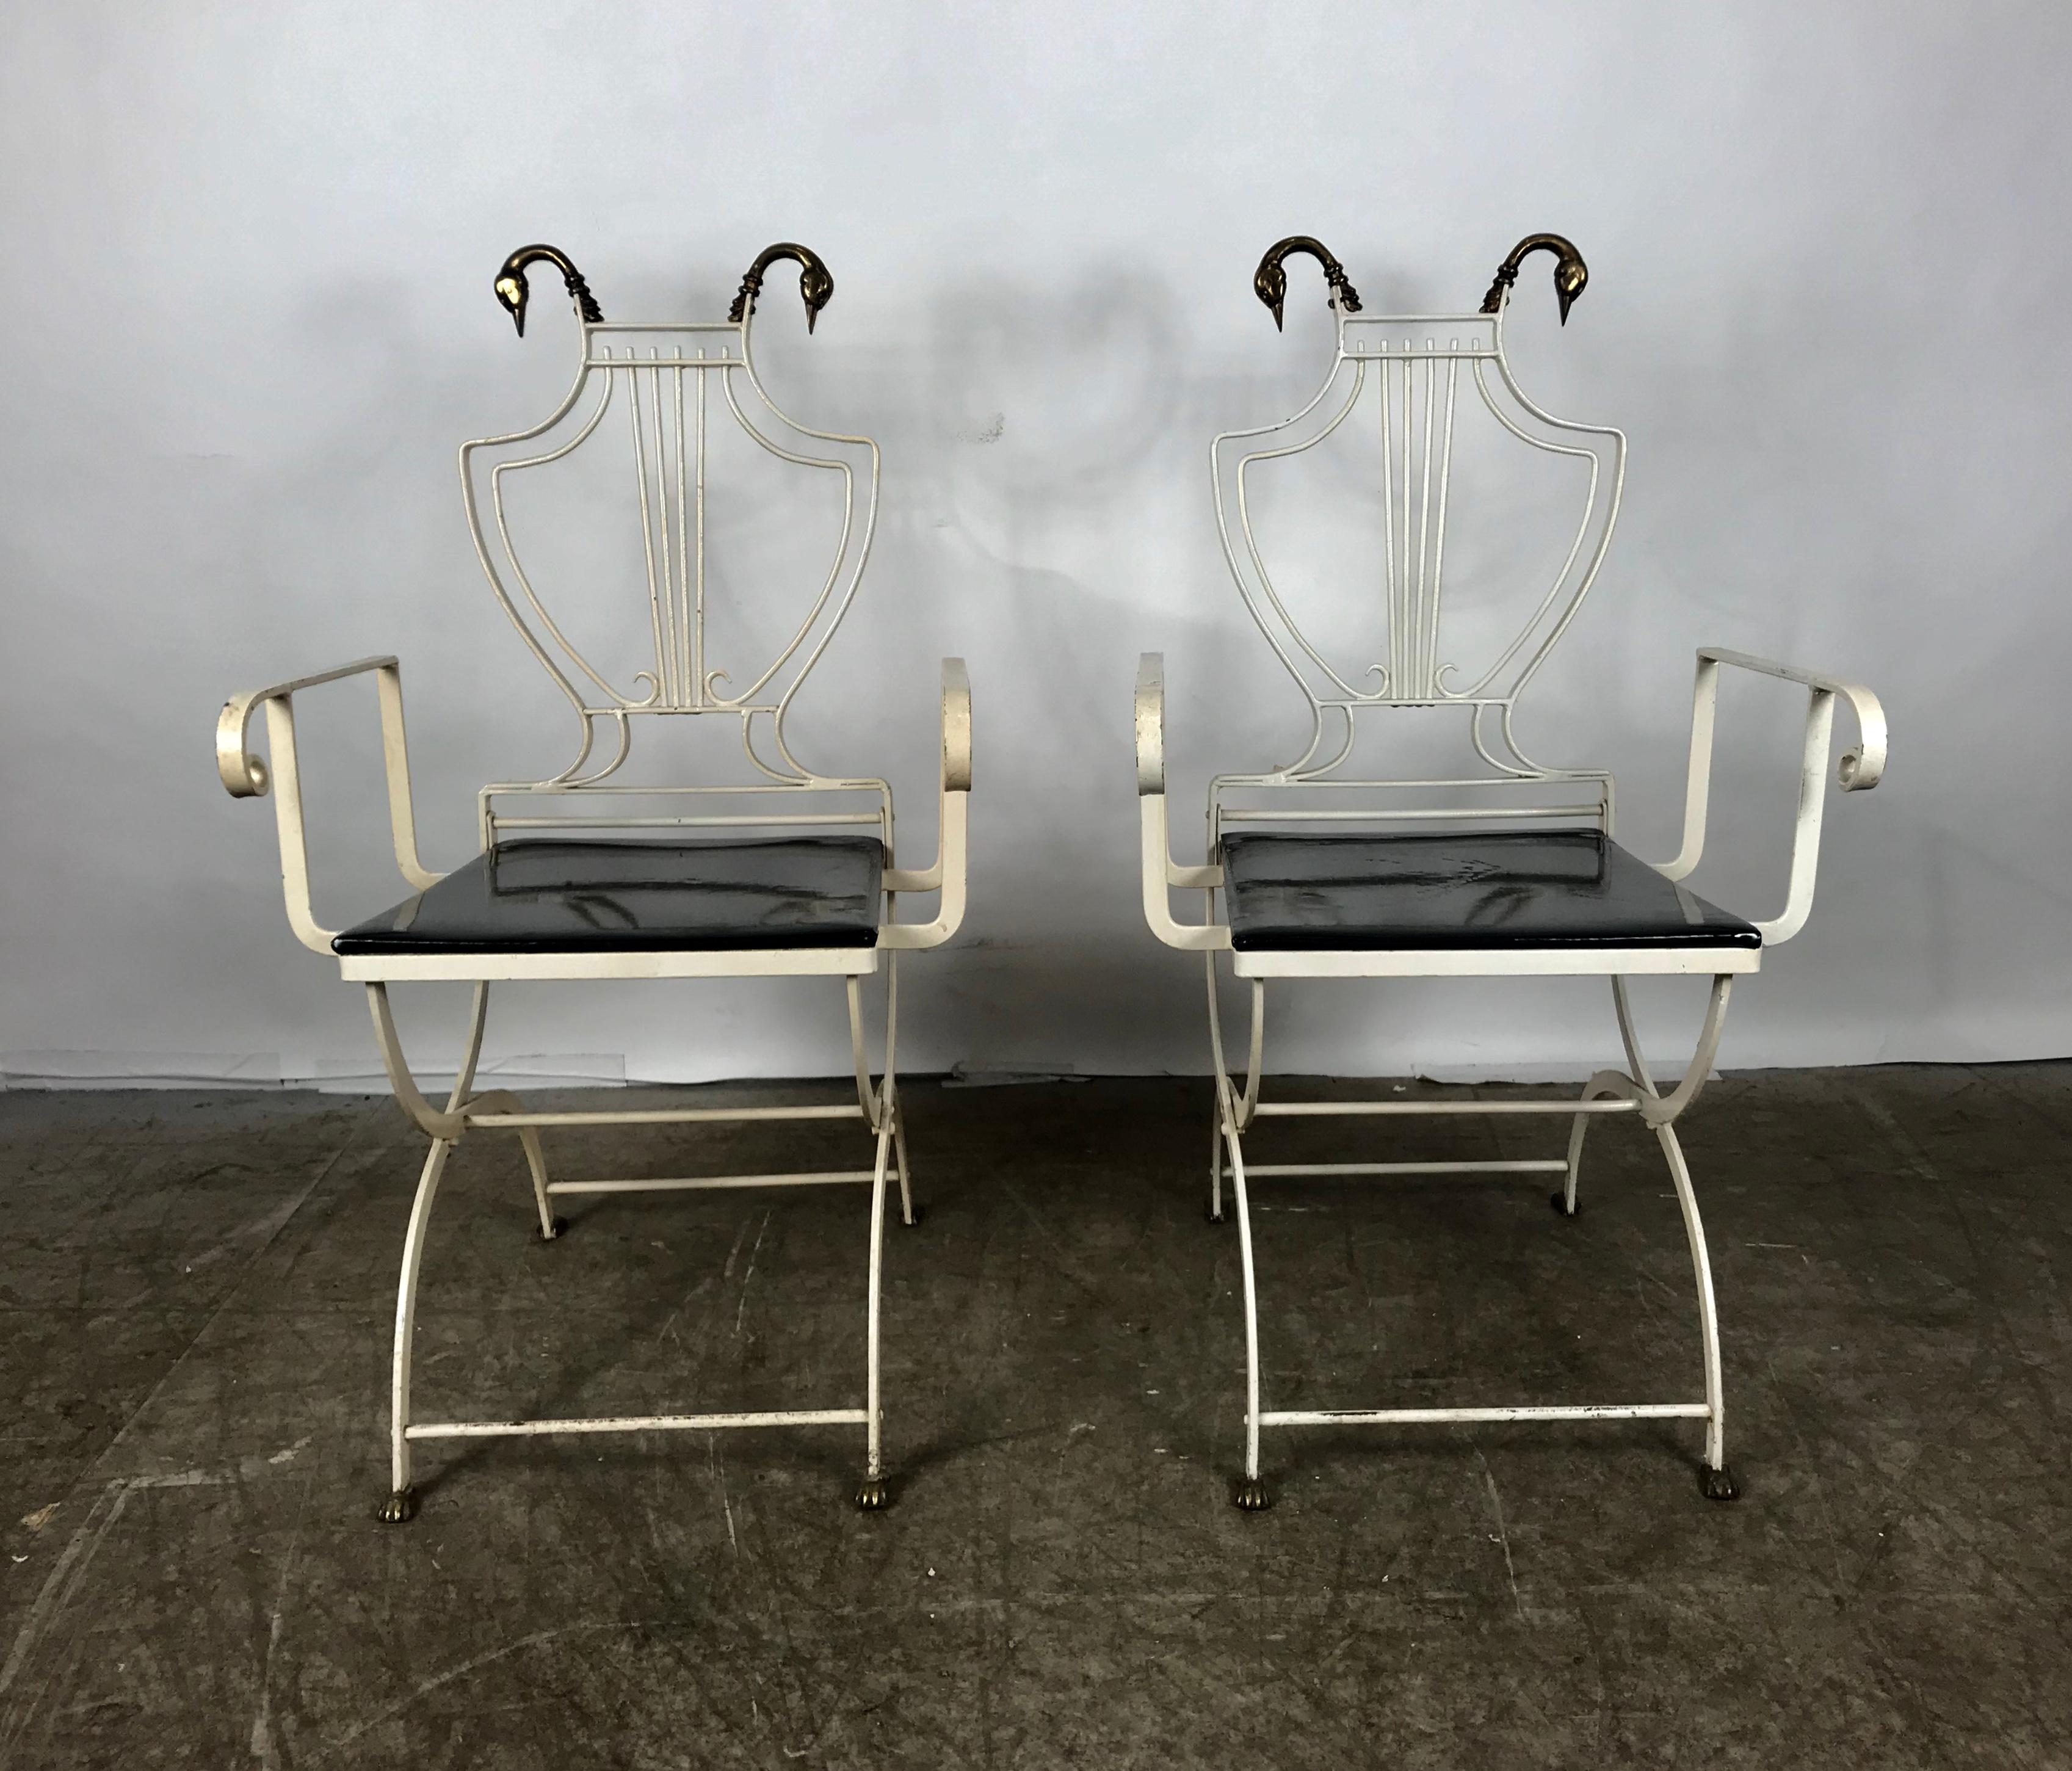 Pair of iron and brass Italian Regency lyre back armchairs with Swans attributed to, Grosfeld House. Brass swan heads and feet, black patent leather seats.